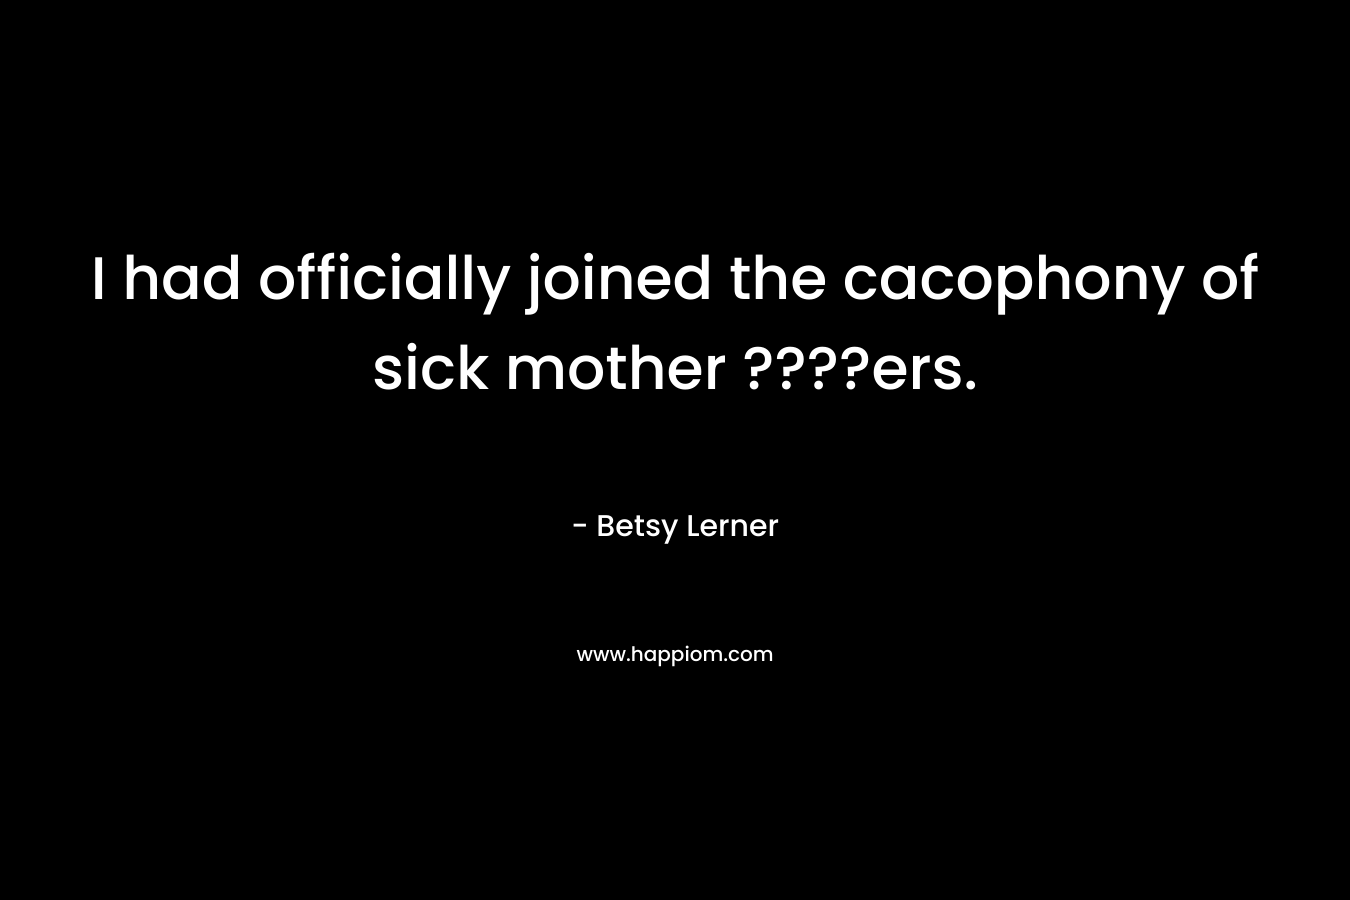 I had officially joined the cacophony of sick mother ????ers. – Betsy Lerner